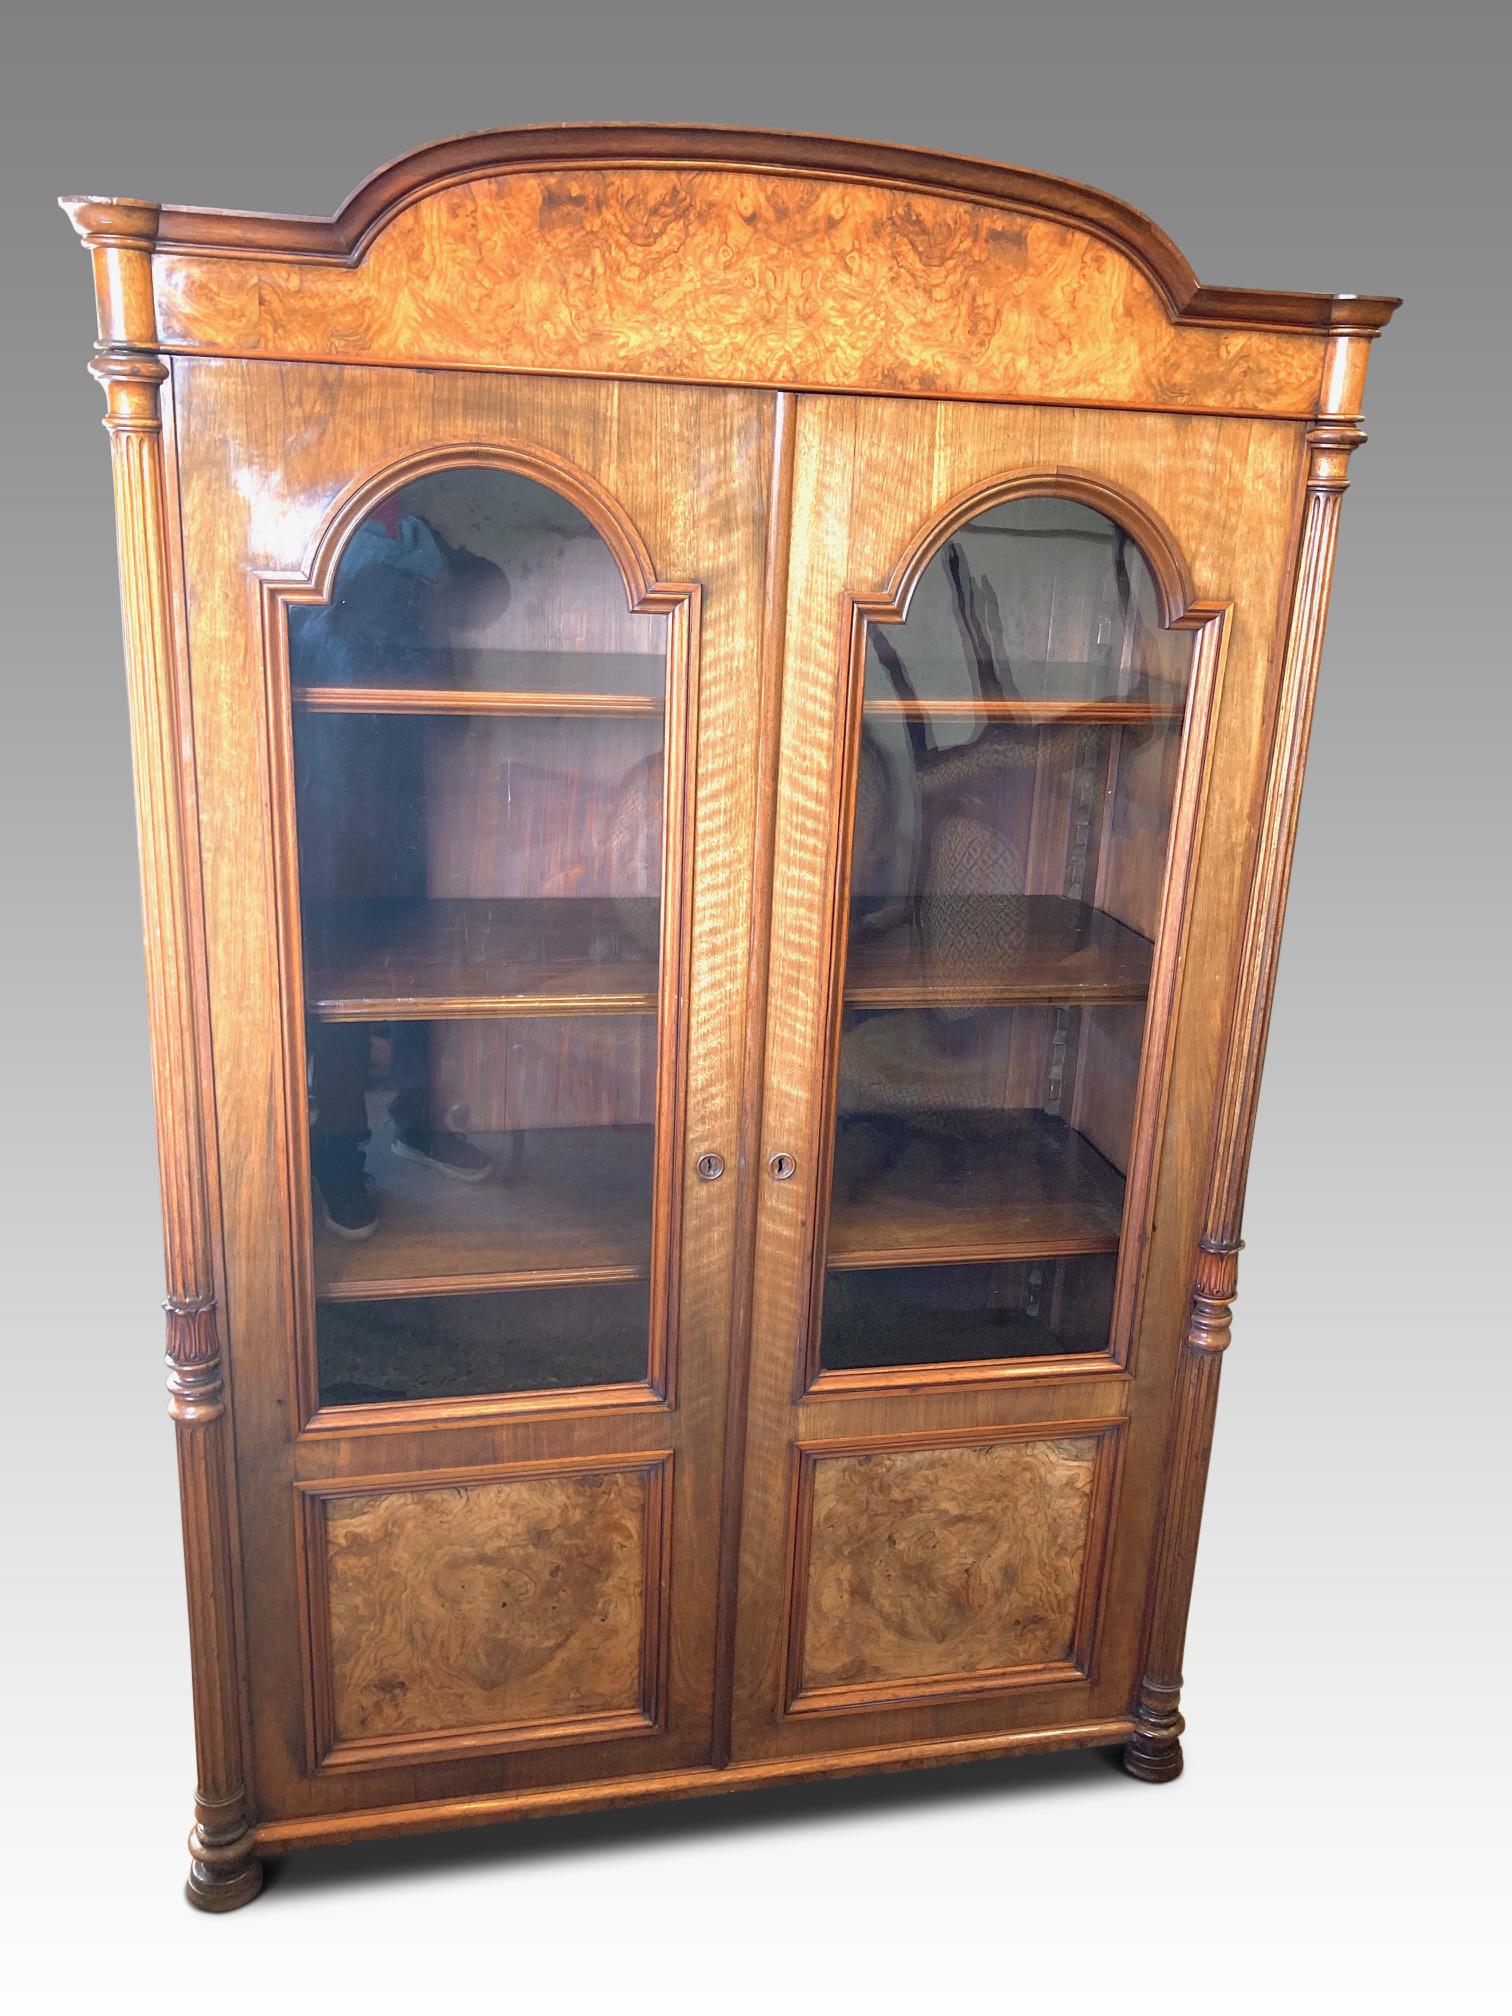 Attractive walnut cabinet / bookcase from the late 19th century. 
This delightful bookcase is of solid construction with figured walnut veneers
on oak and an all-over mellow colour and antique patination. Working key. 
There are 2 glazed doors